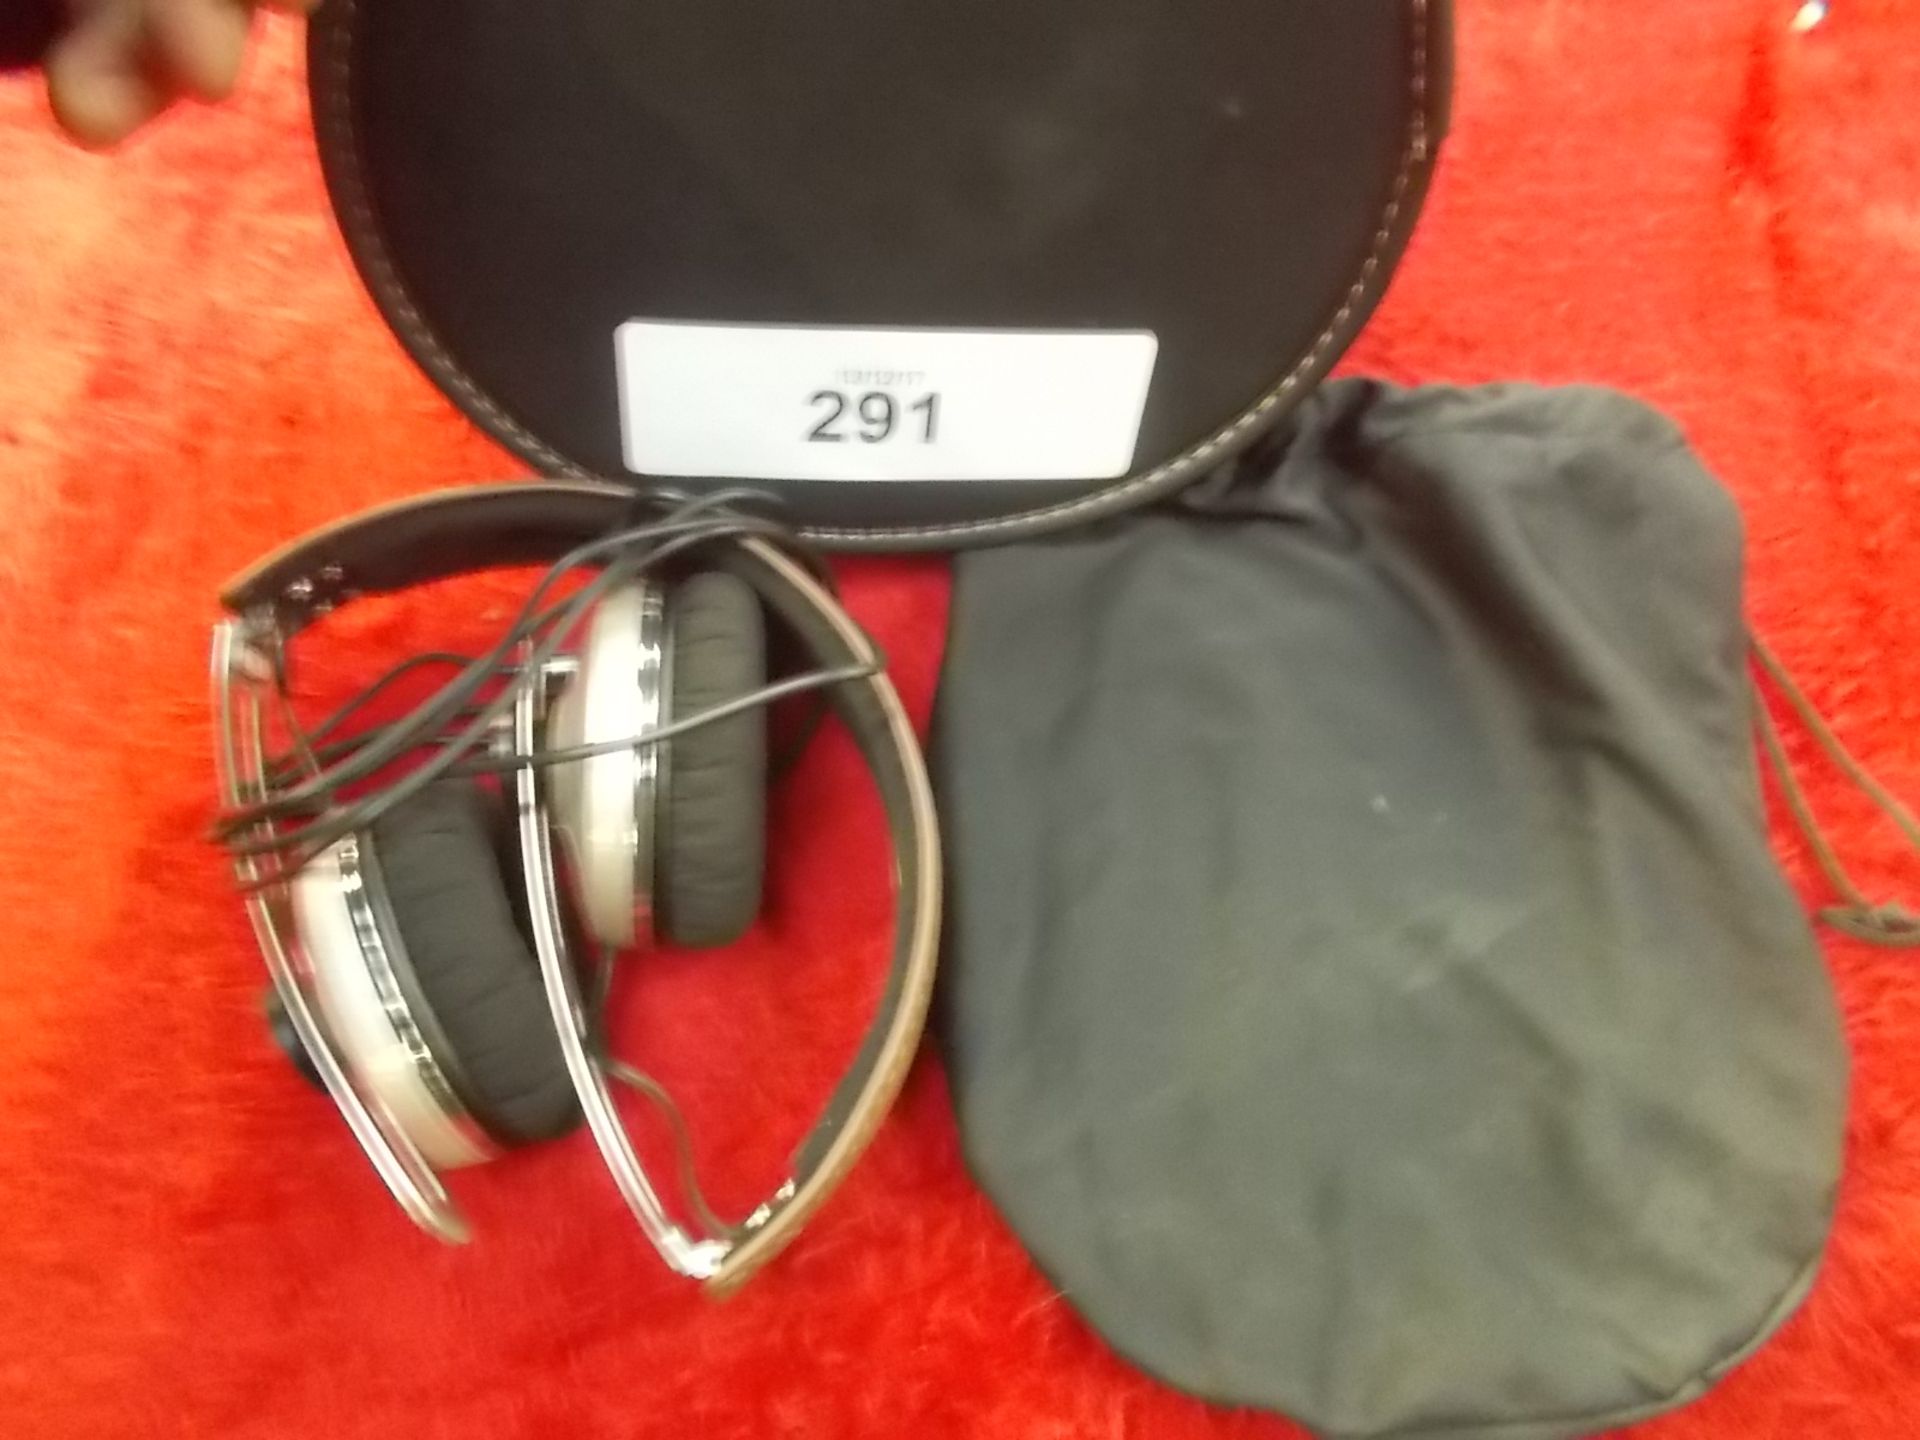 A pair of Sennheiser Momentum wire headphones with storage bag and pouch - Second-hand, tested